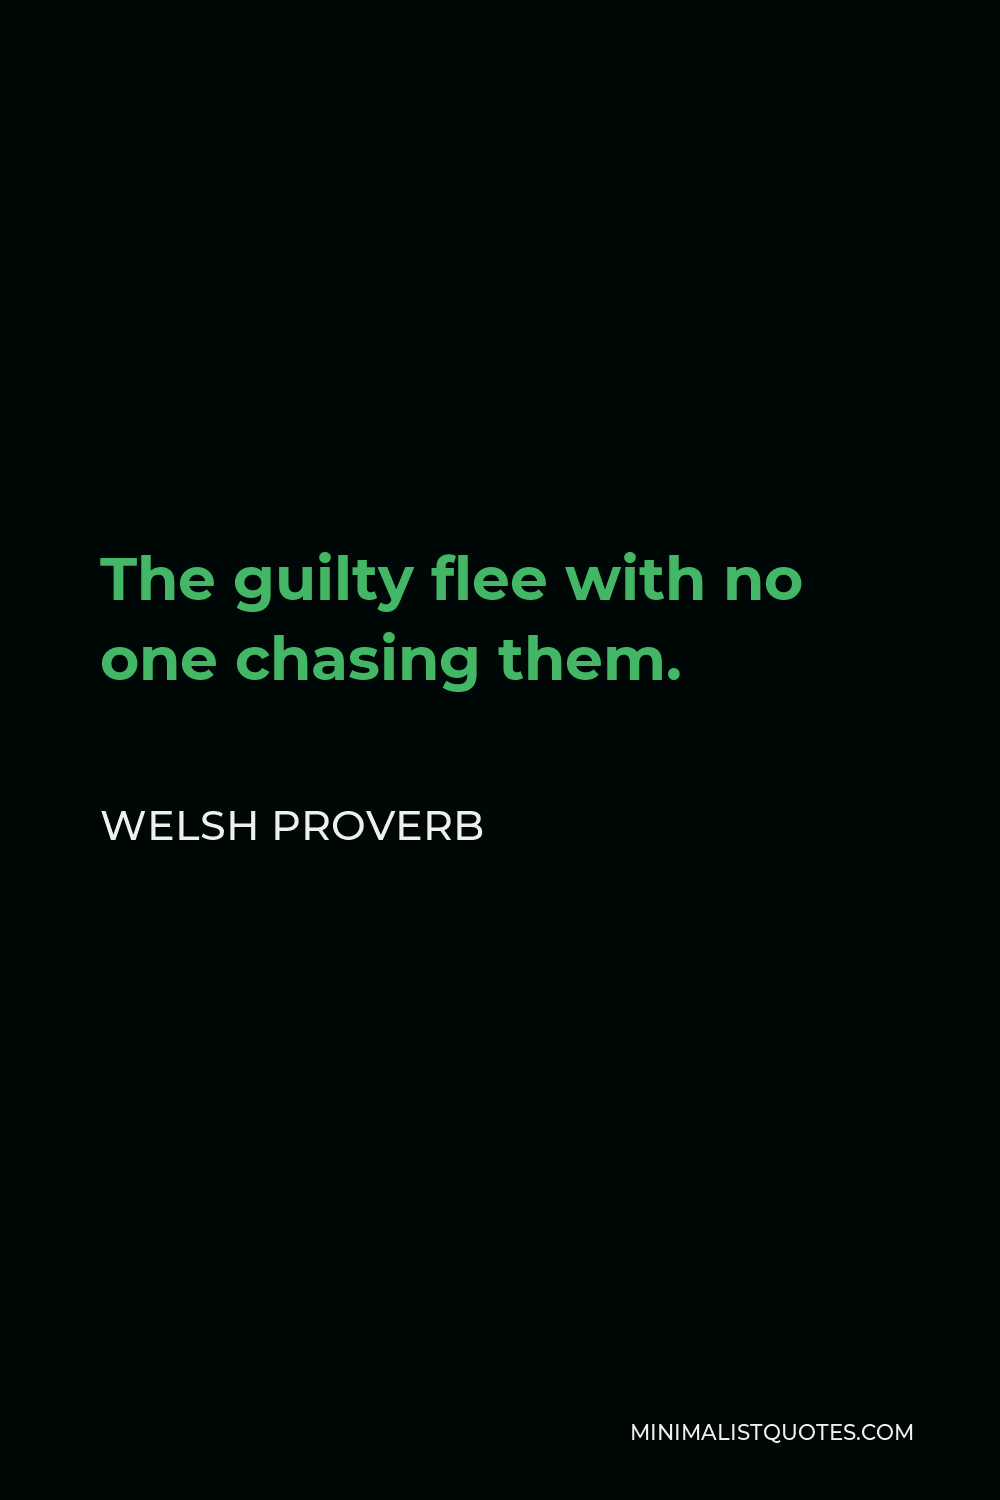 Welsh Proverb Quote - The guilty flee with no one chasing them.